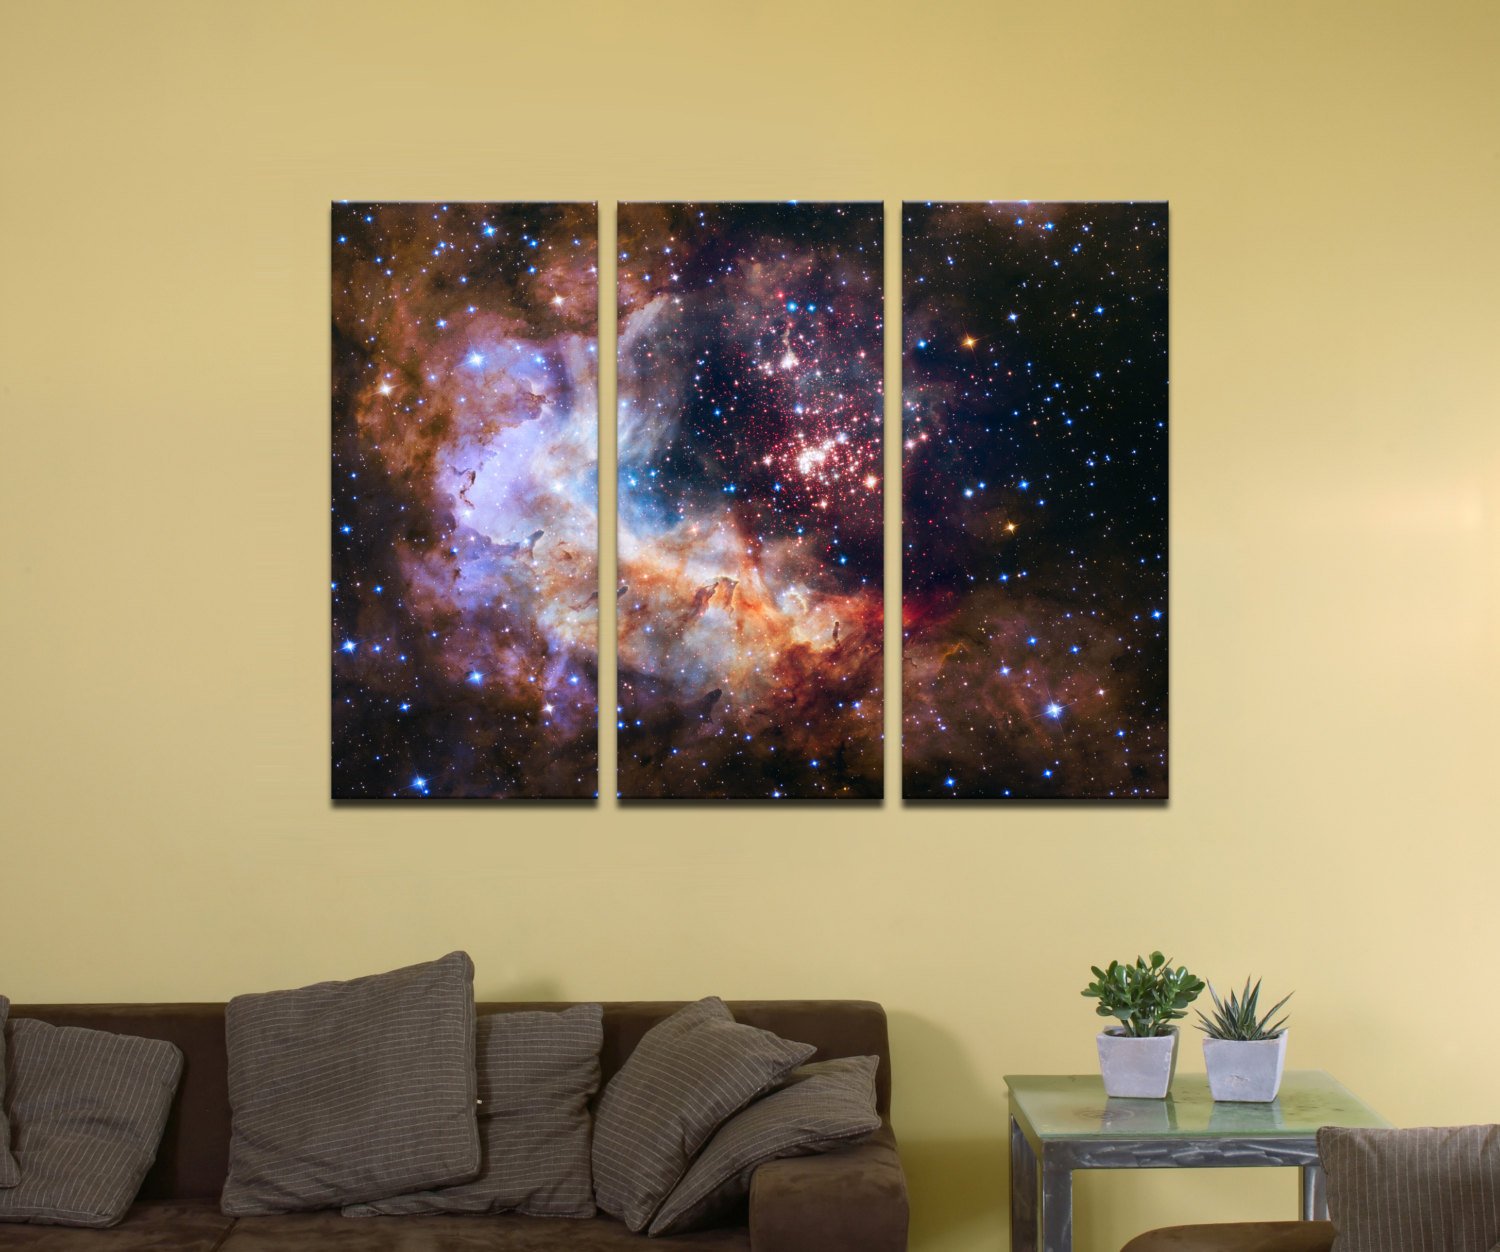 Celestial Fireworks, Hubble 25th Anniversary HD Space Photo - 48" x 32", 3-Piece Split Canvas Wall Mural